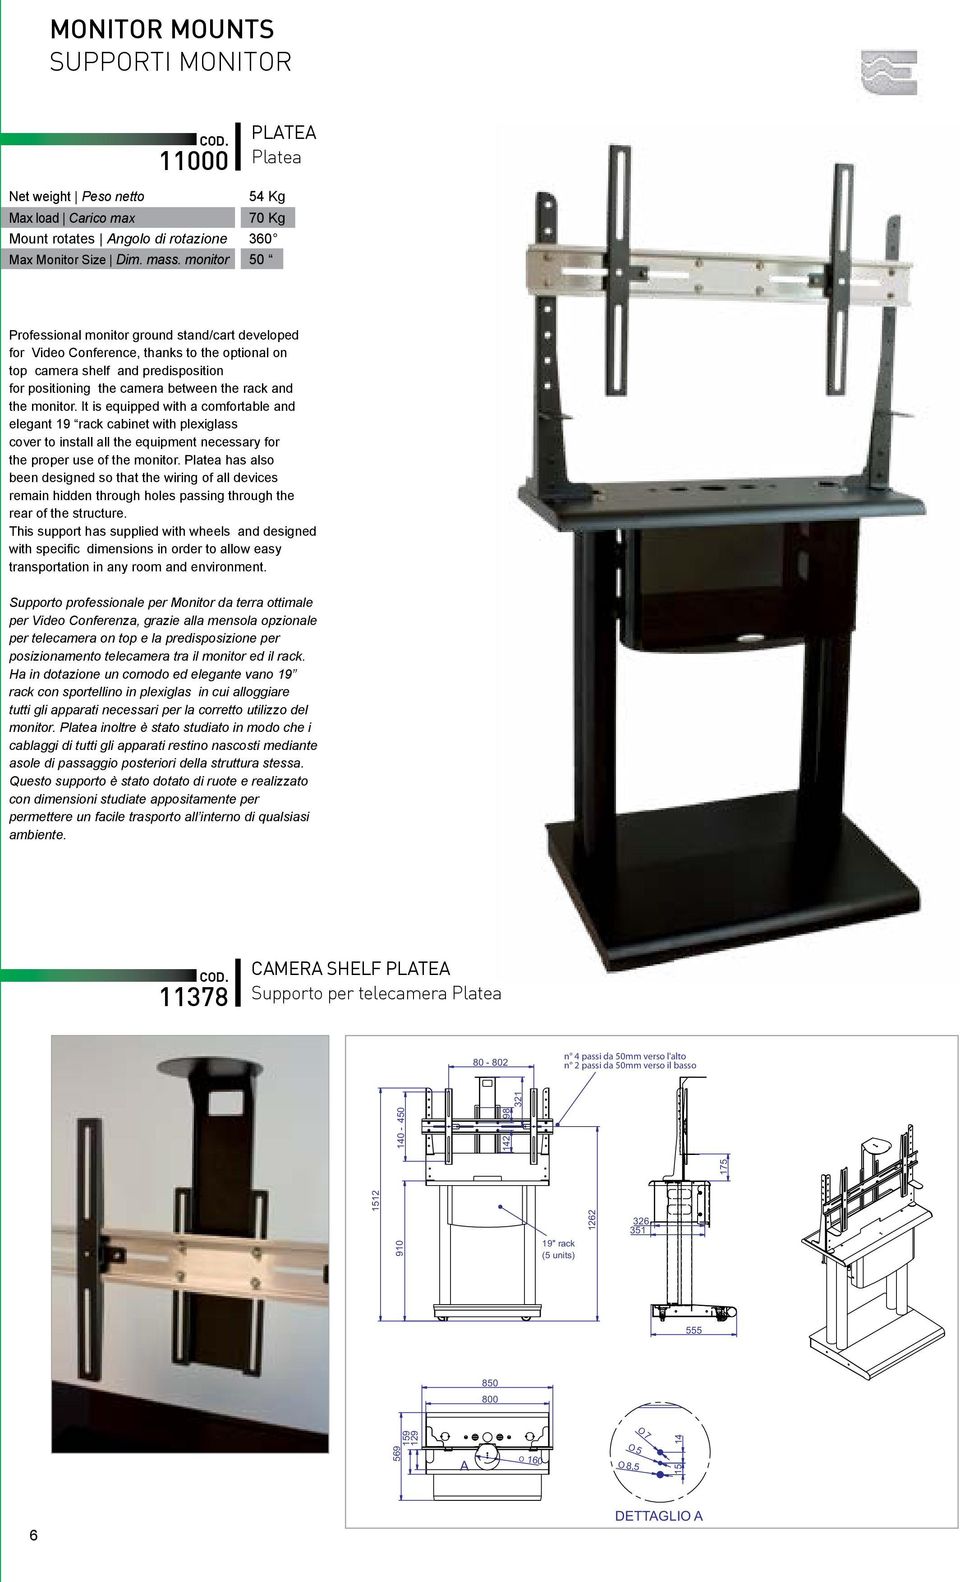 monitor. It is equipped with a comfortable and elegant 19 rack cabinet with plexiglass cover to install all the equipment necessary for the proper use of the monitor.